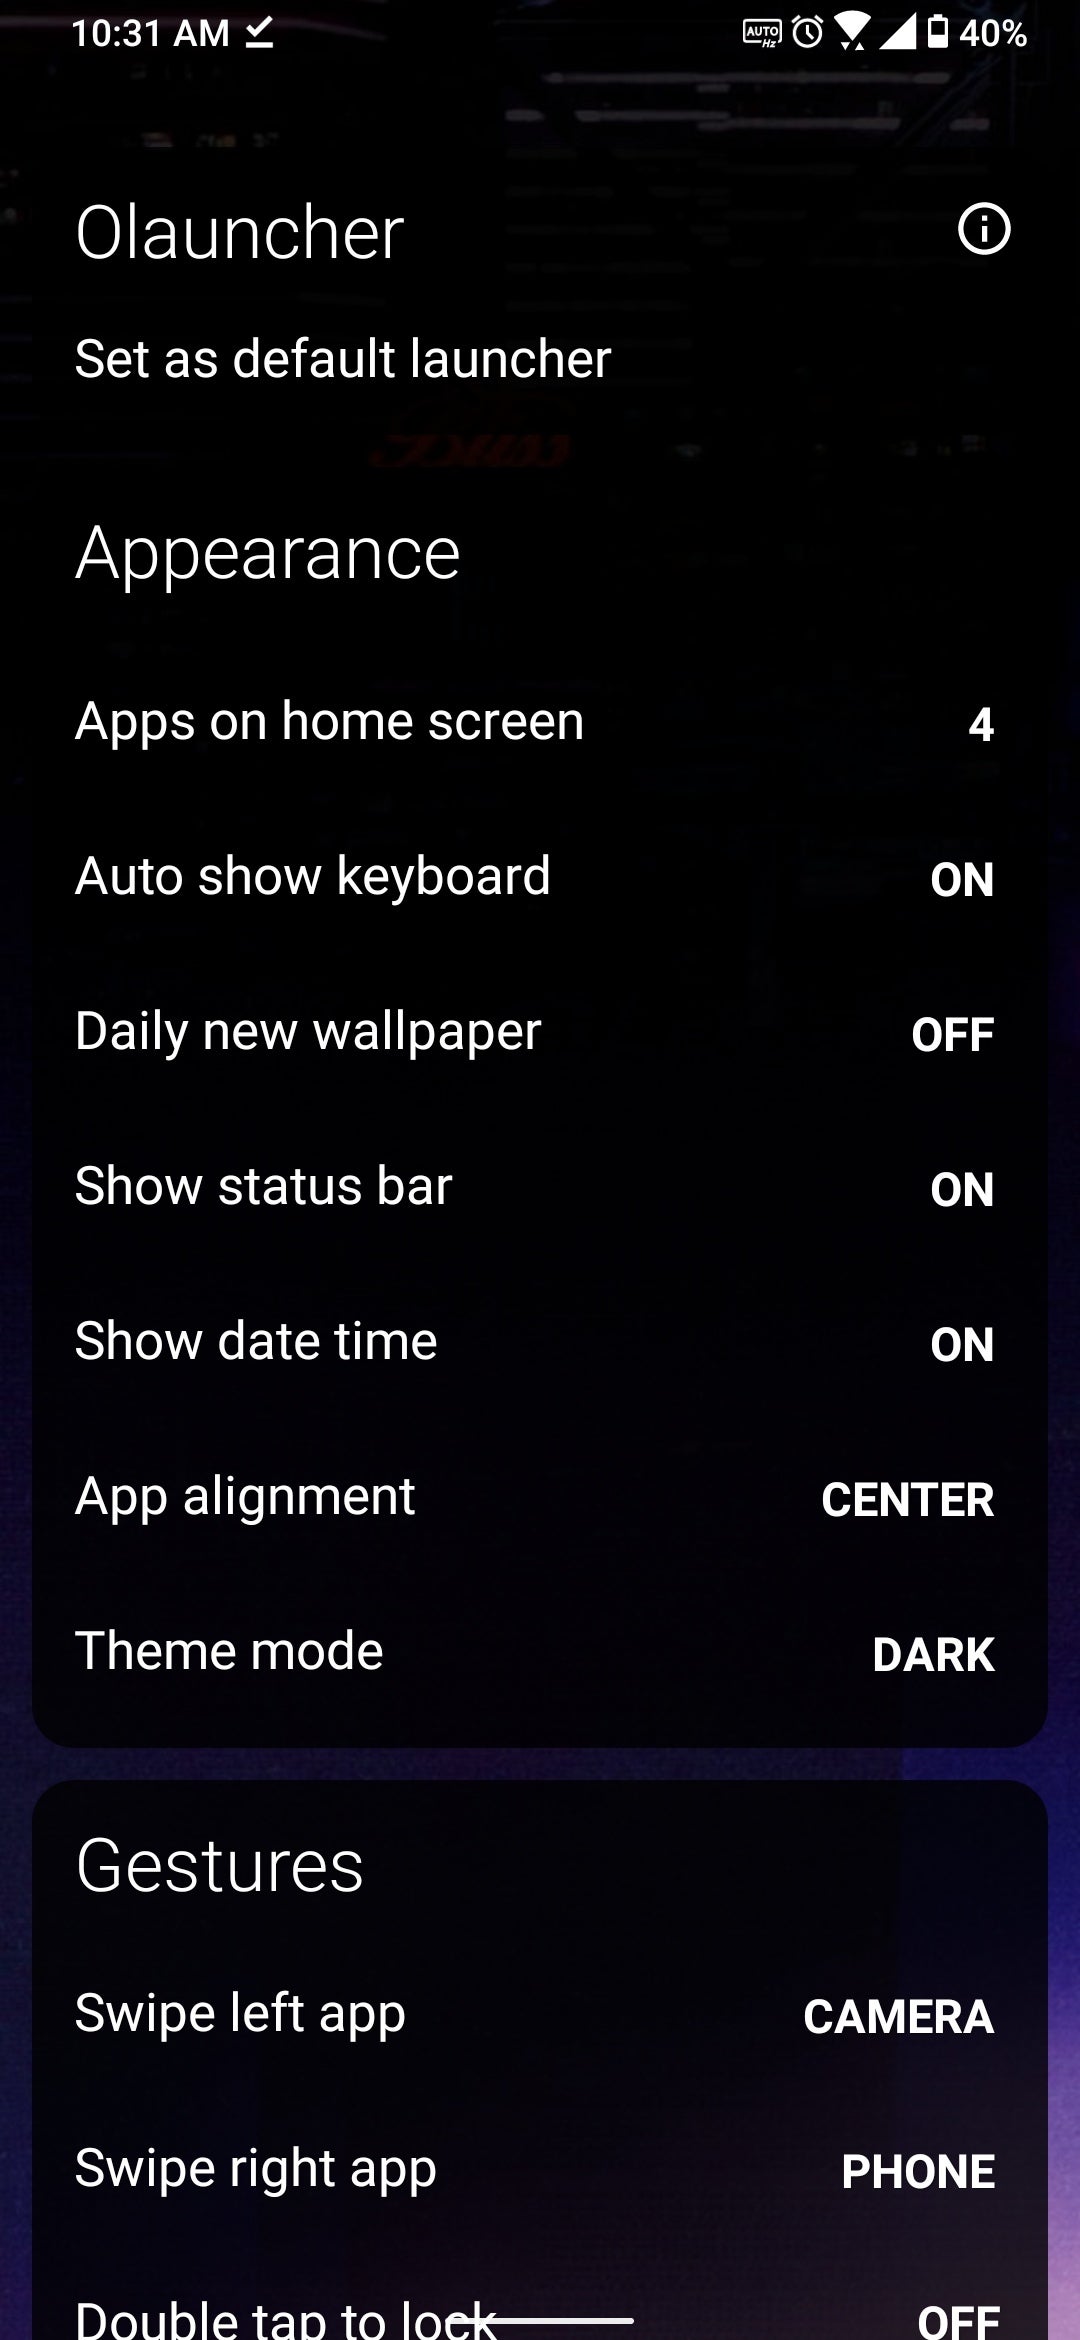 The Olauncher settings screen - Android Refresh Tuesdays – Minimalist theme